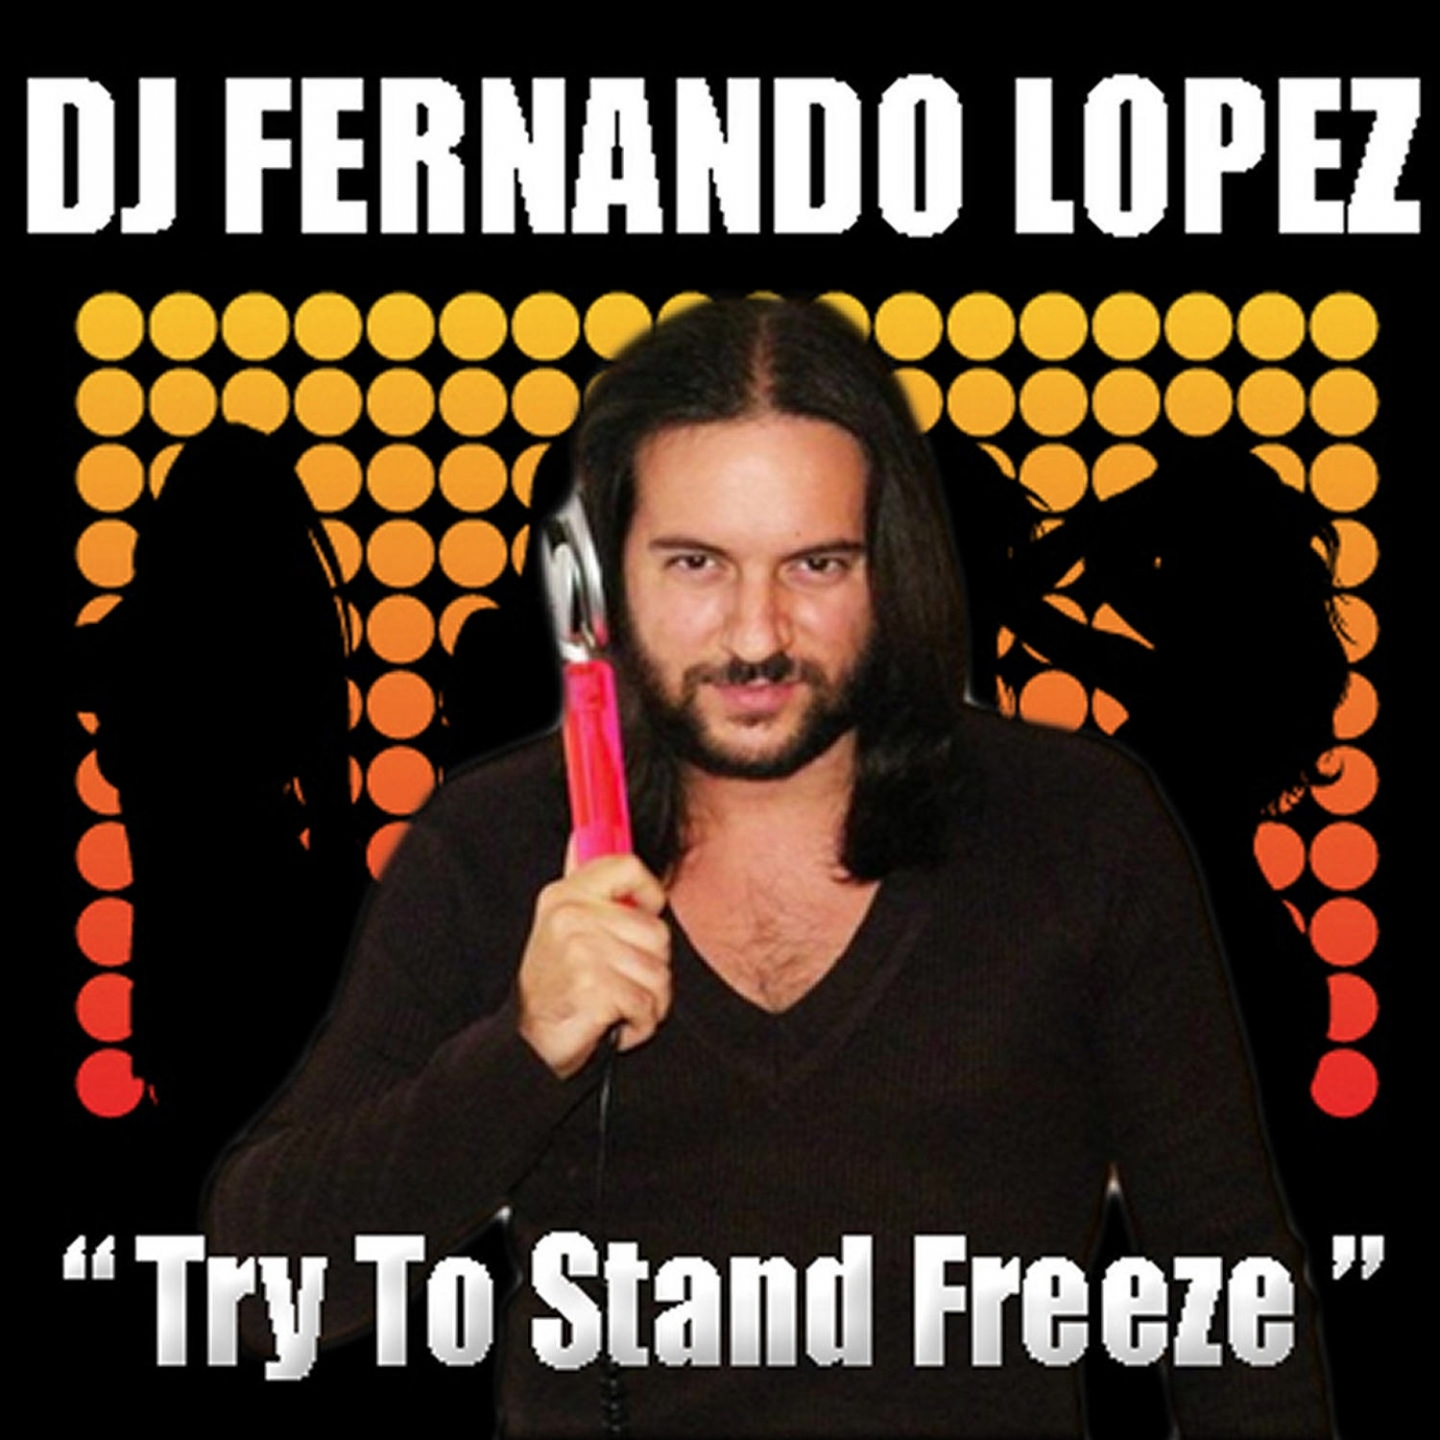 Try To Stand Freeze (Radio Lopez)